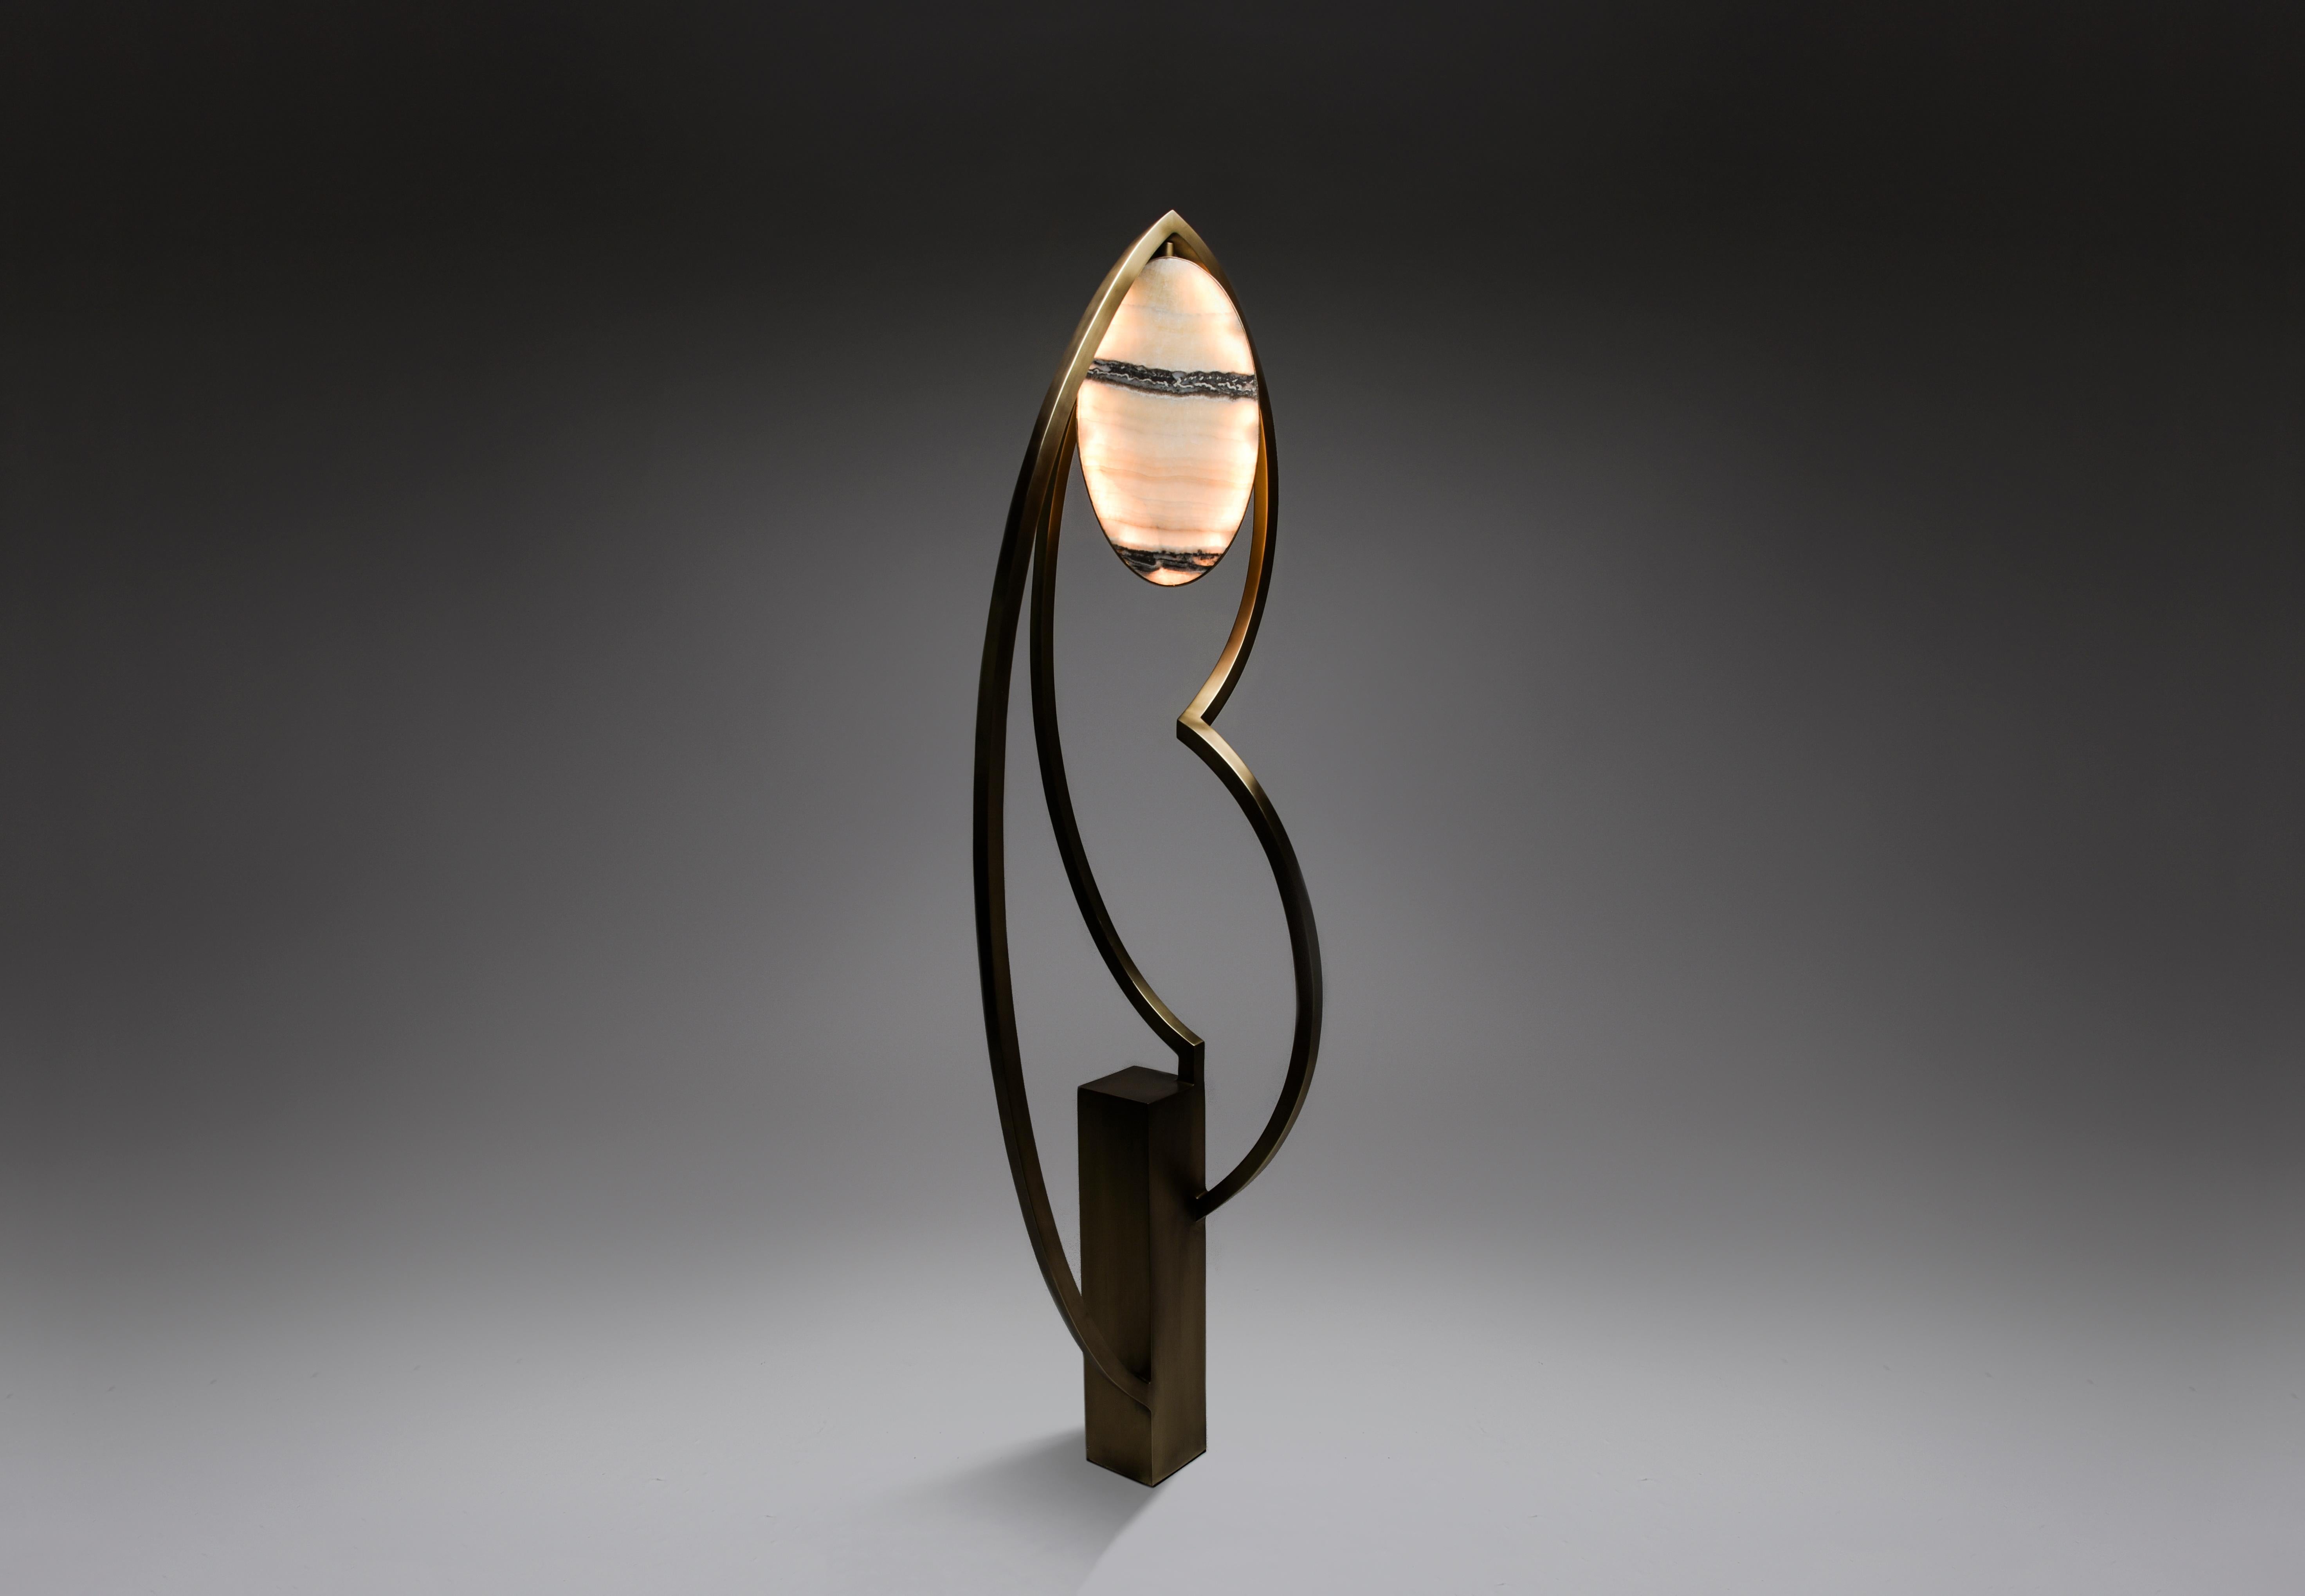 Patrick Coard Paris launches a unique and beautifully sculptural lighting collection inspired by music as a continuation of his candle line. The prima dancer floor light in large is an ethereal and sculptural piece. Discreet LED lights are inserted